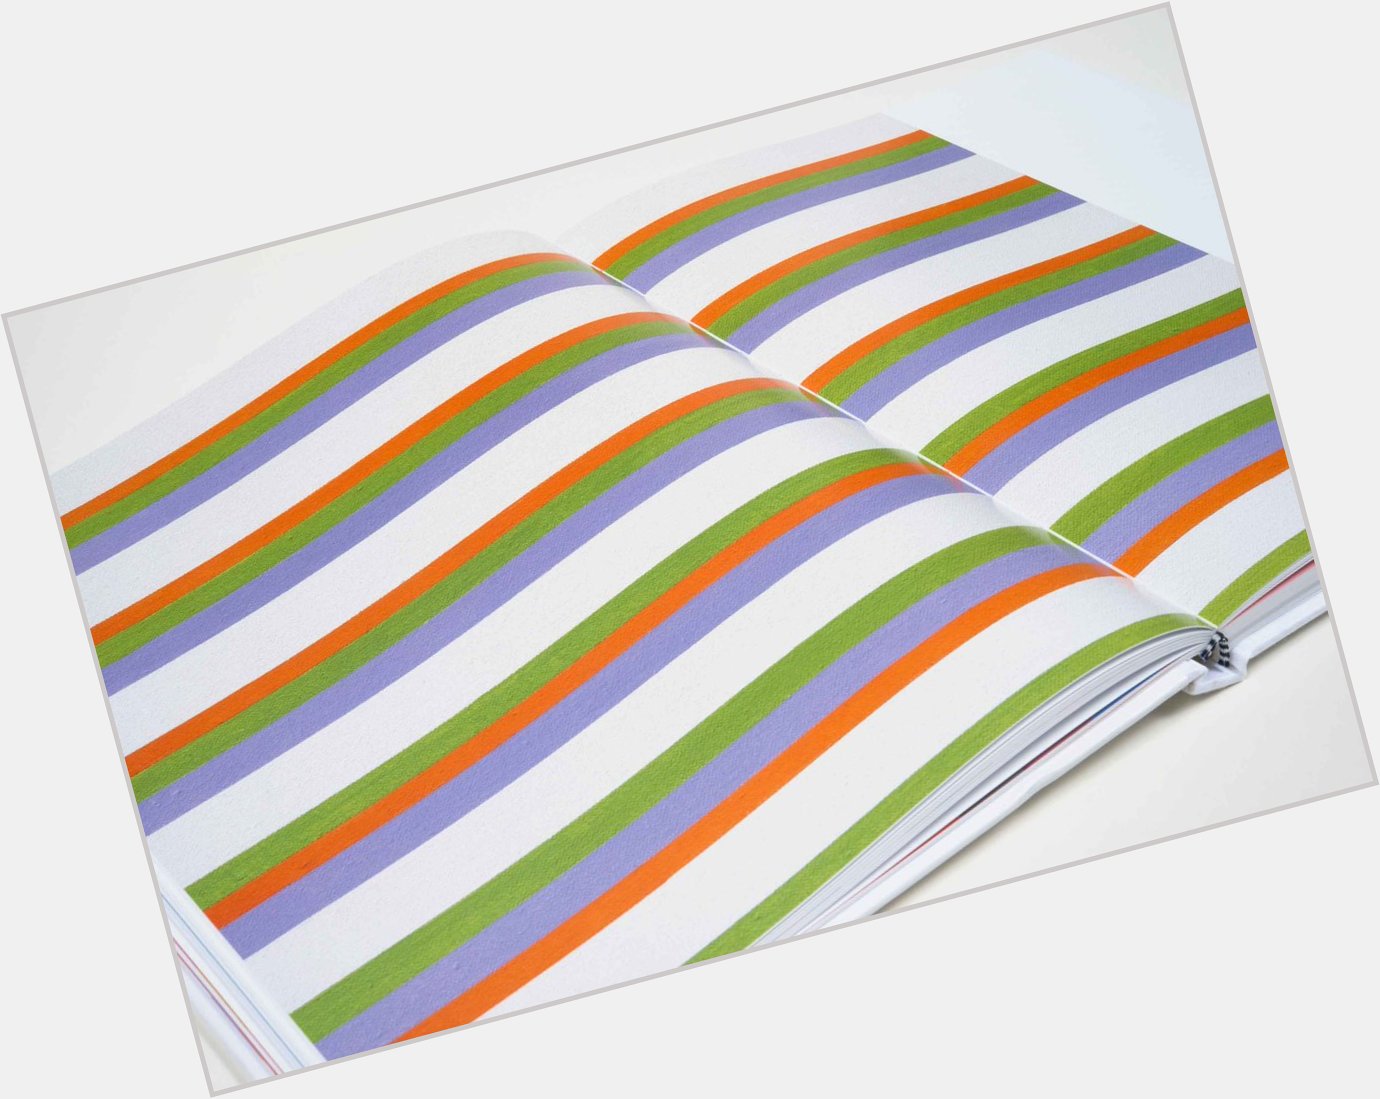 Wishing a happy birthday w/ \The Stripe Paintings\ published in 2014  